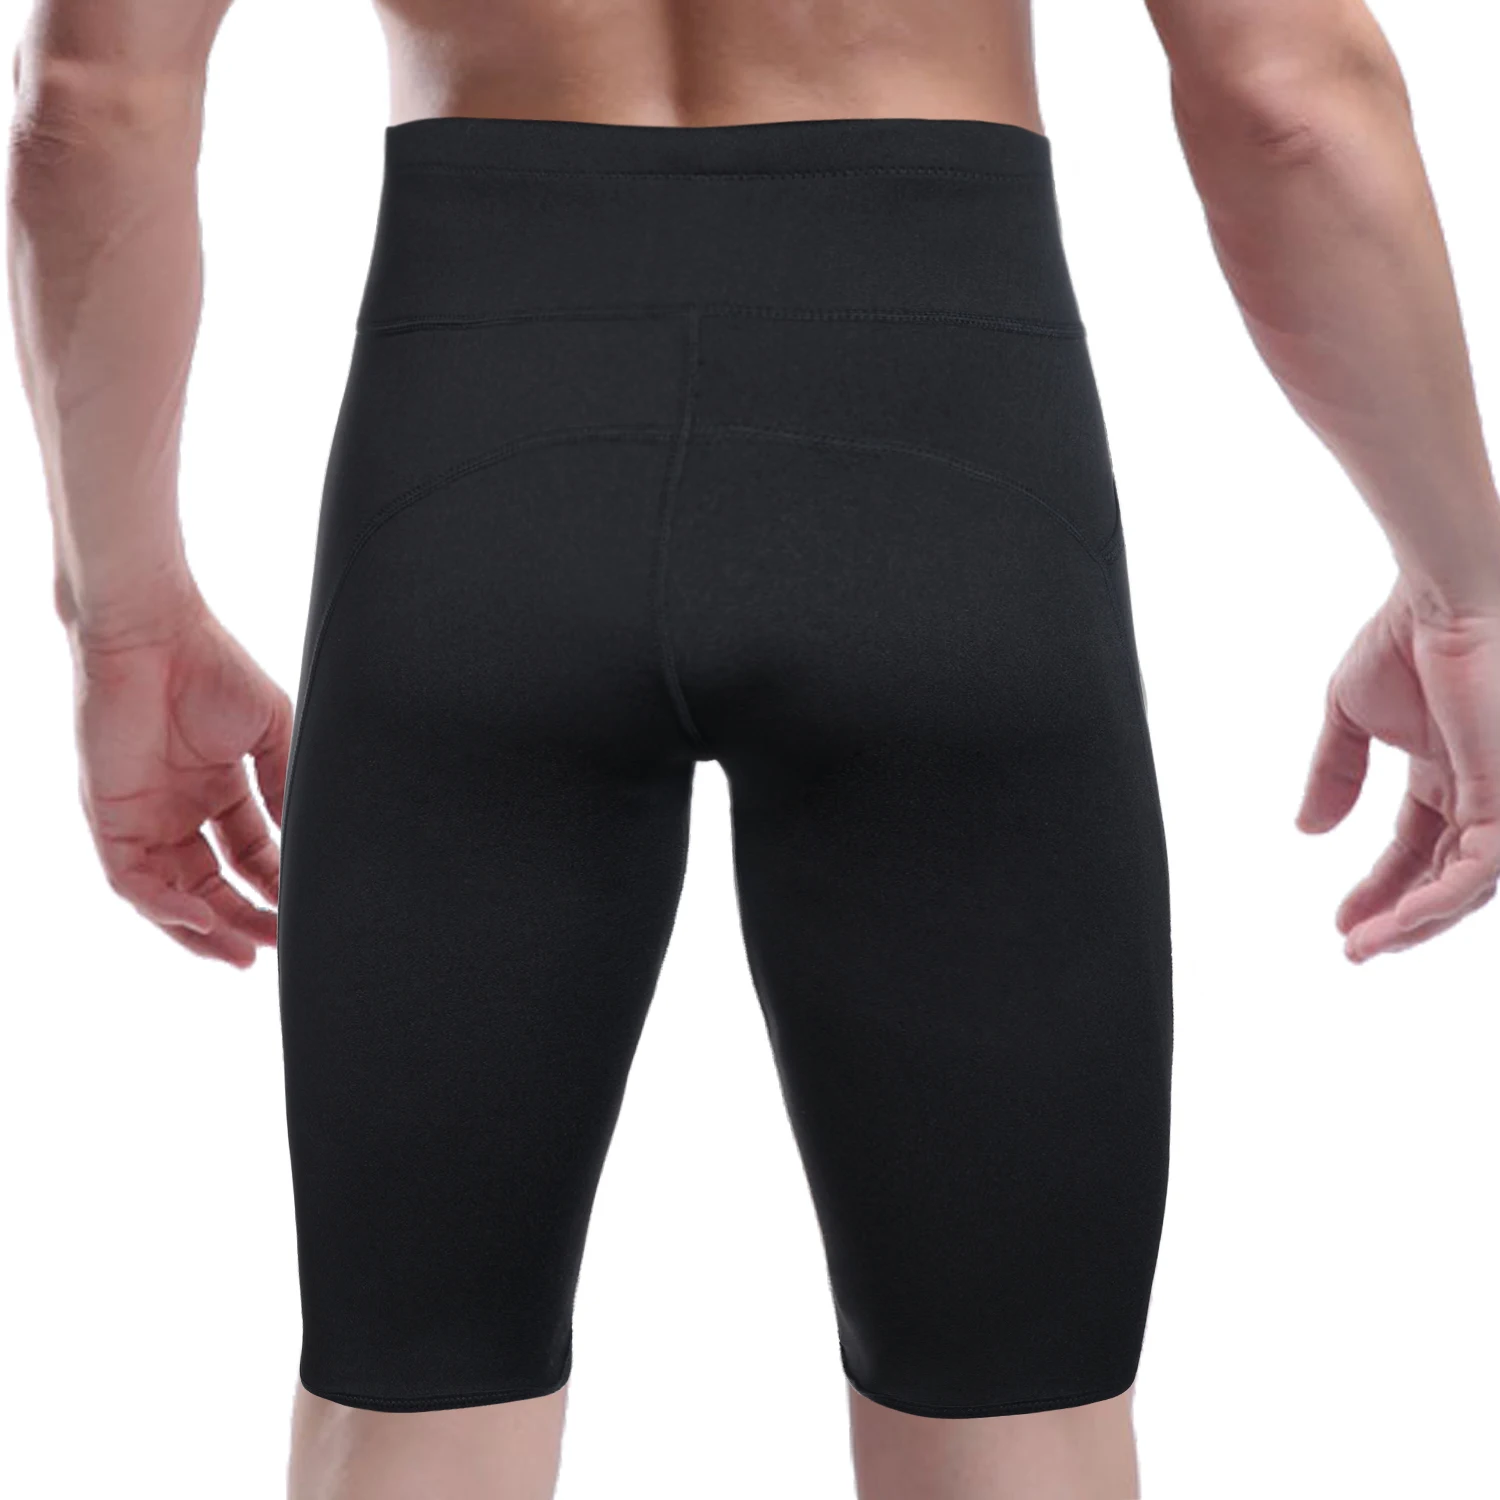 Waist Sudatory Fat Burning Half Pants Shorts for Body Shaping and Weight Loss Ausom Mens Thermal Slimmer High 